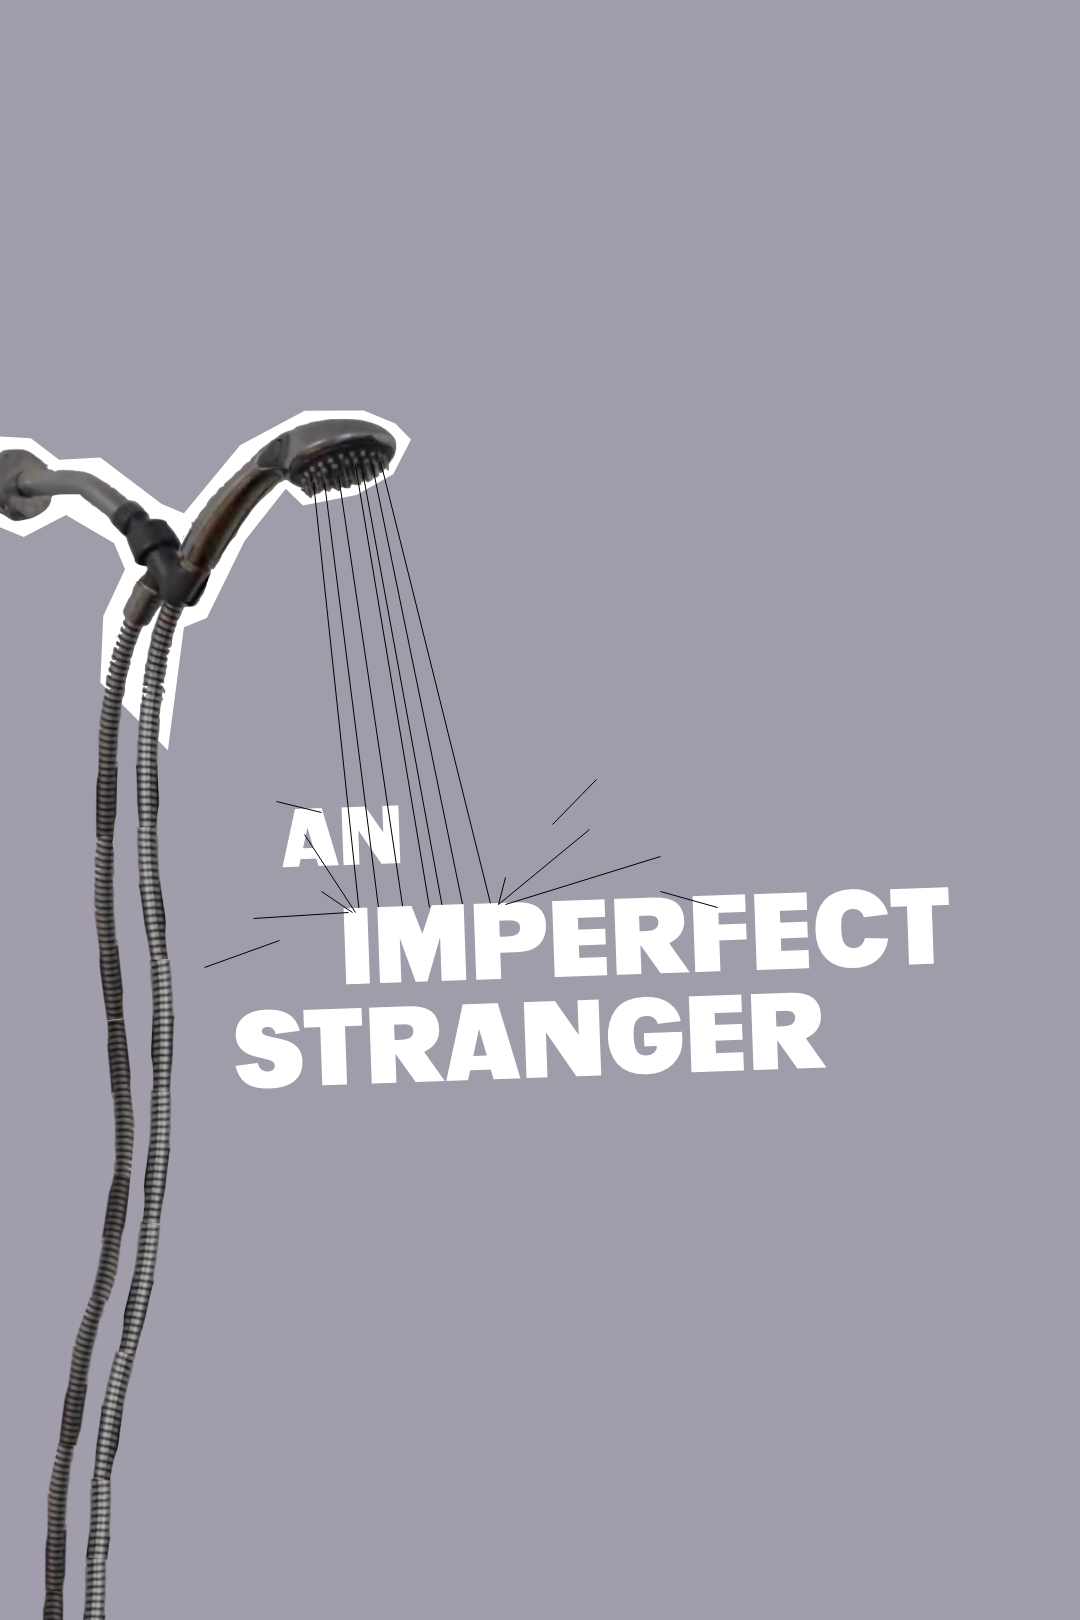 Poster for the film "An Imperfect Stranger"